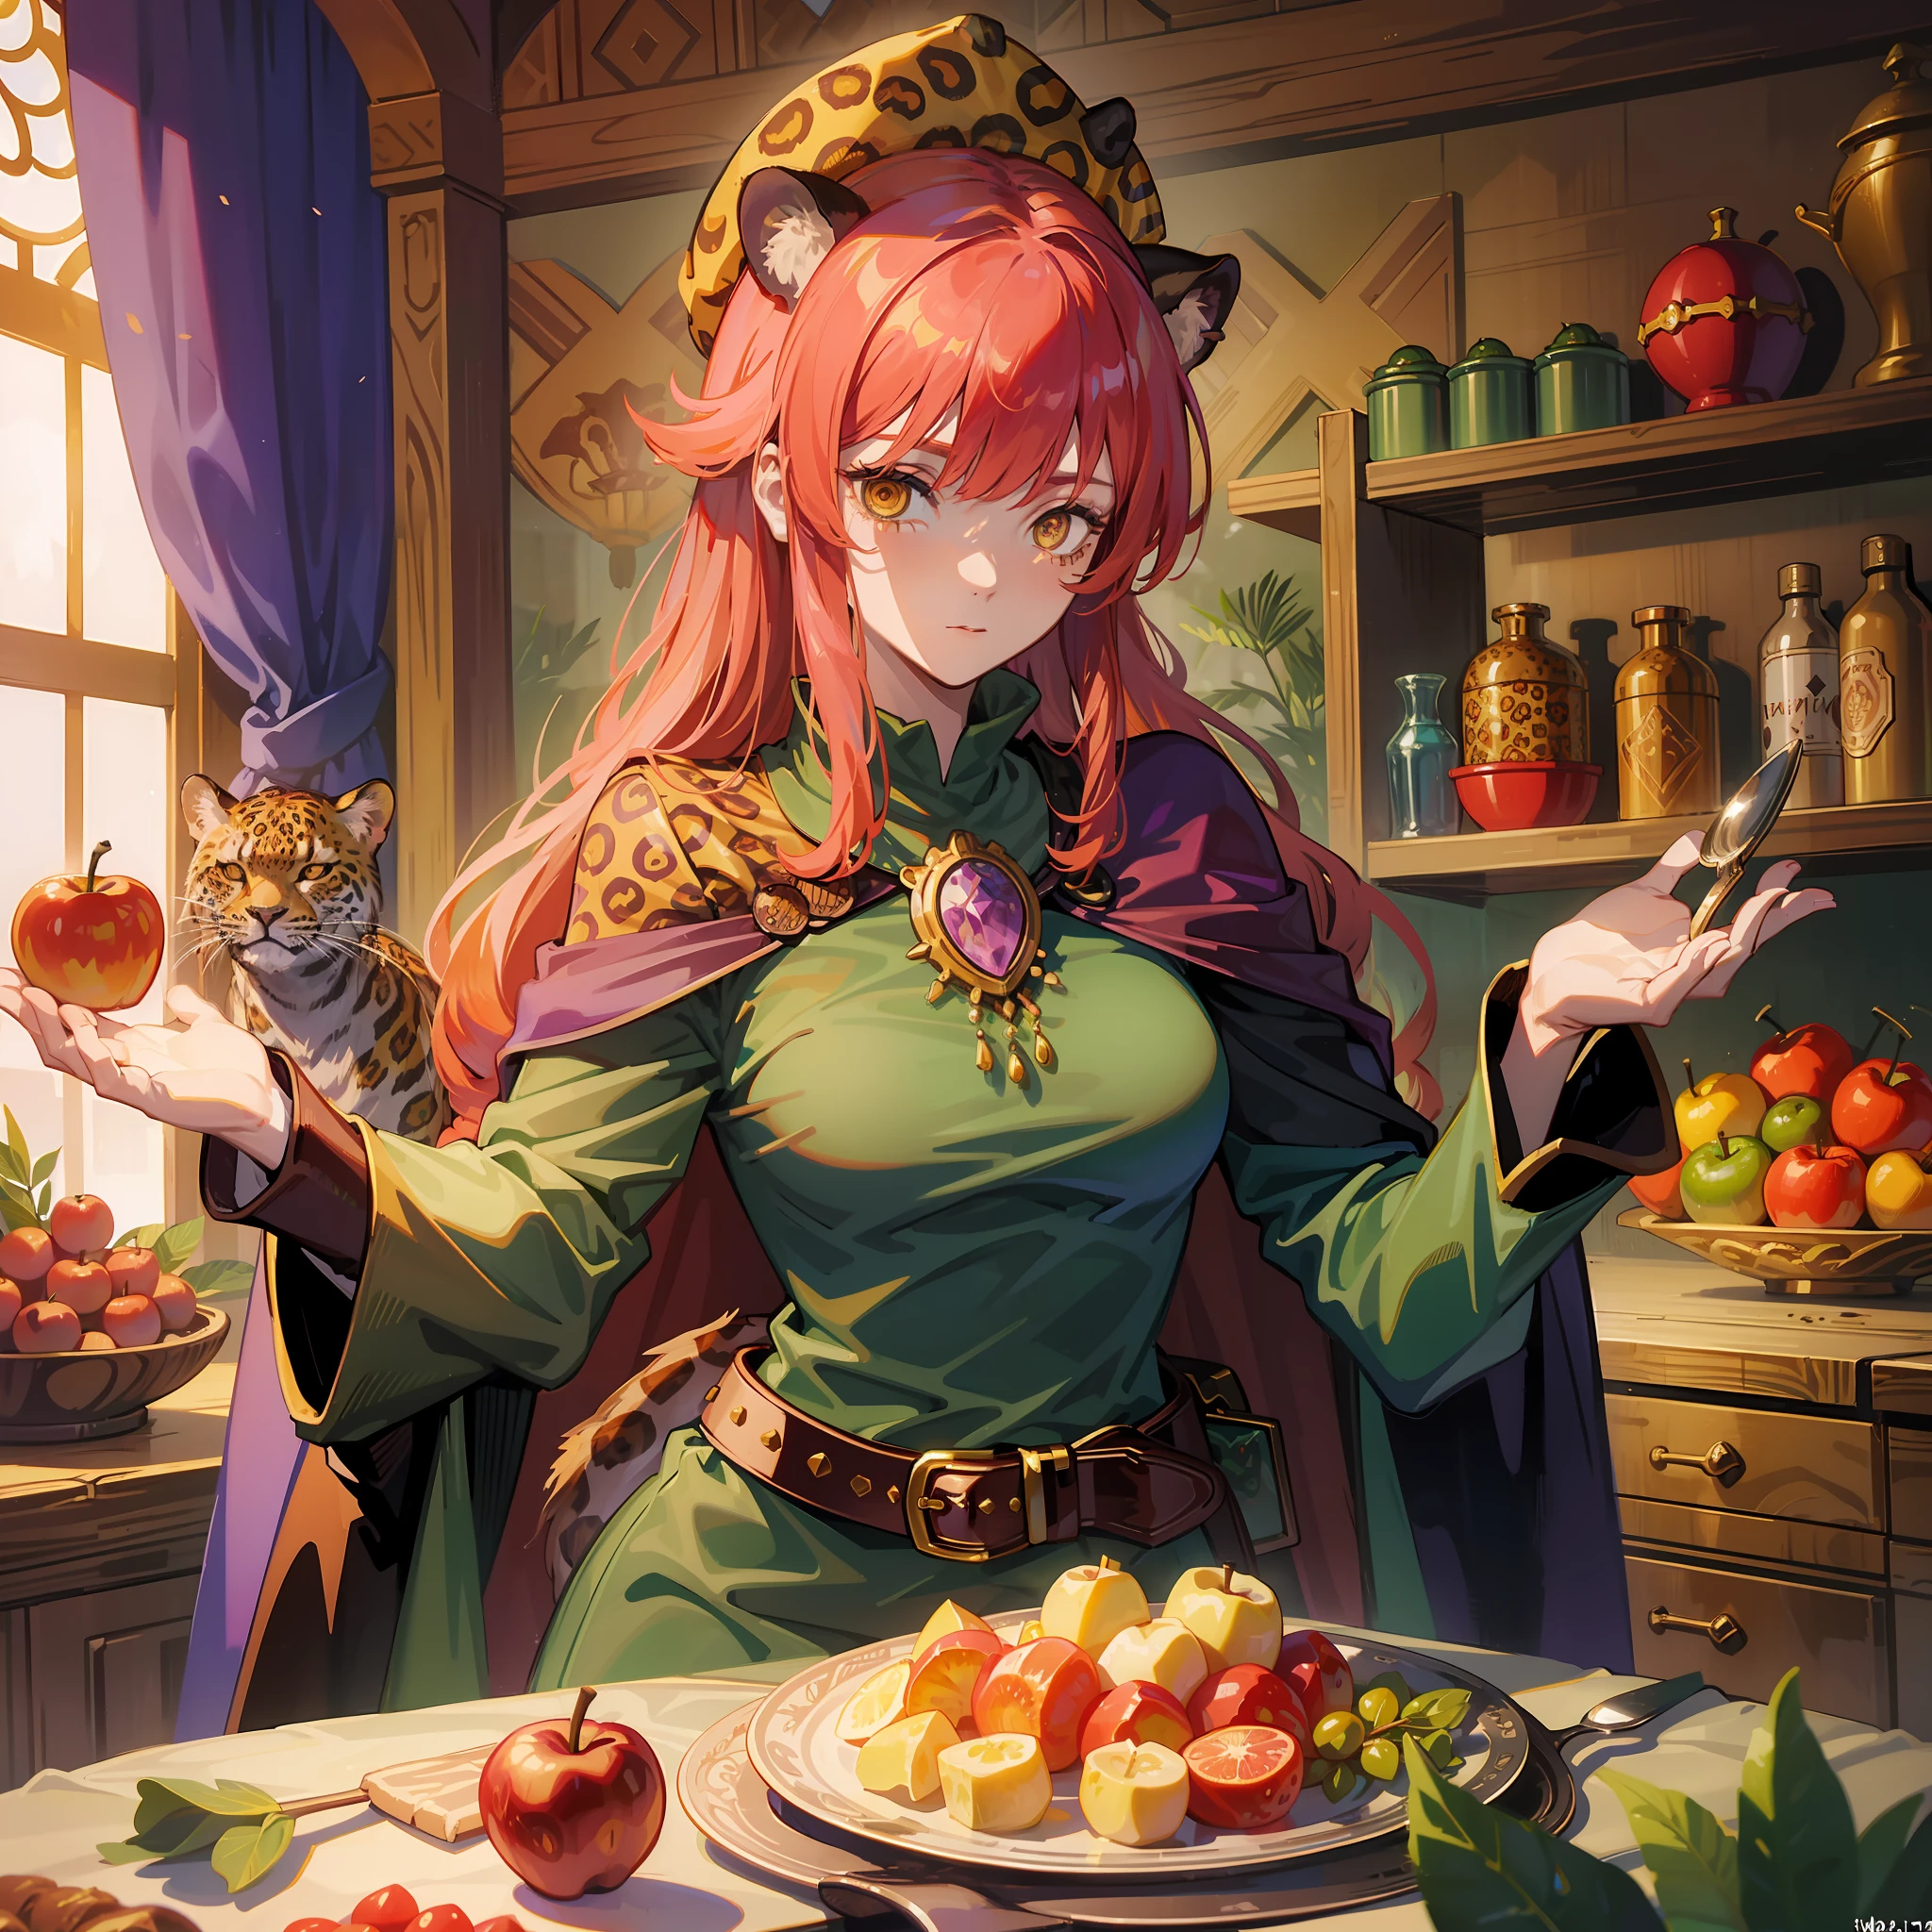 Makima, medieval times, animals, food, tunic, dark green velvet, tight pants, leopard print cape, black leather high boots, fruit and vegetable accessories, brooches and pins, golden apple, grape bunch, belt with plate-shaped buckle, bag with culinary pattern print, red hair, sexy, would be